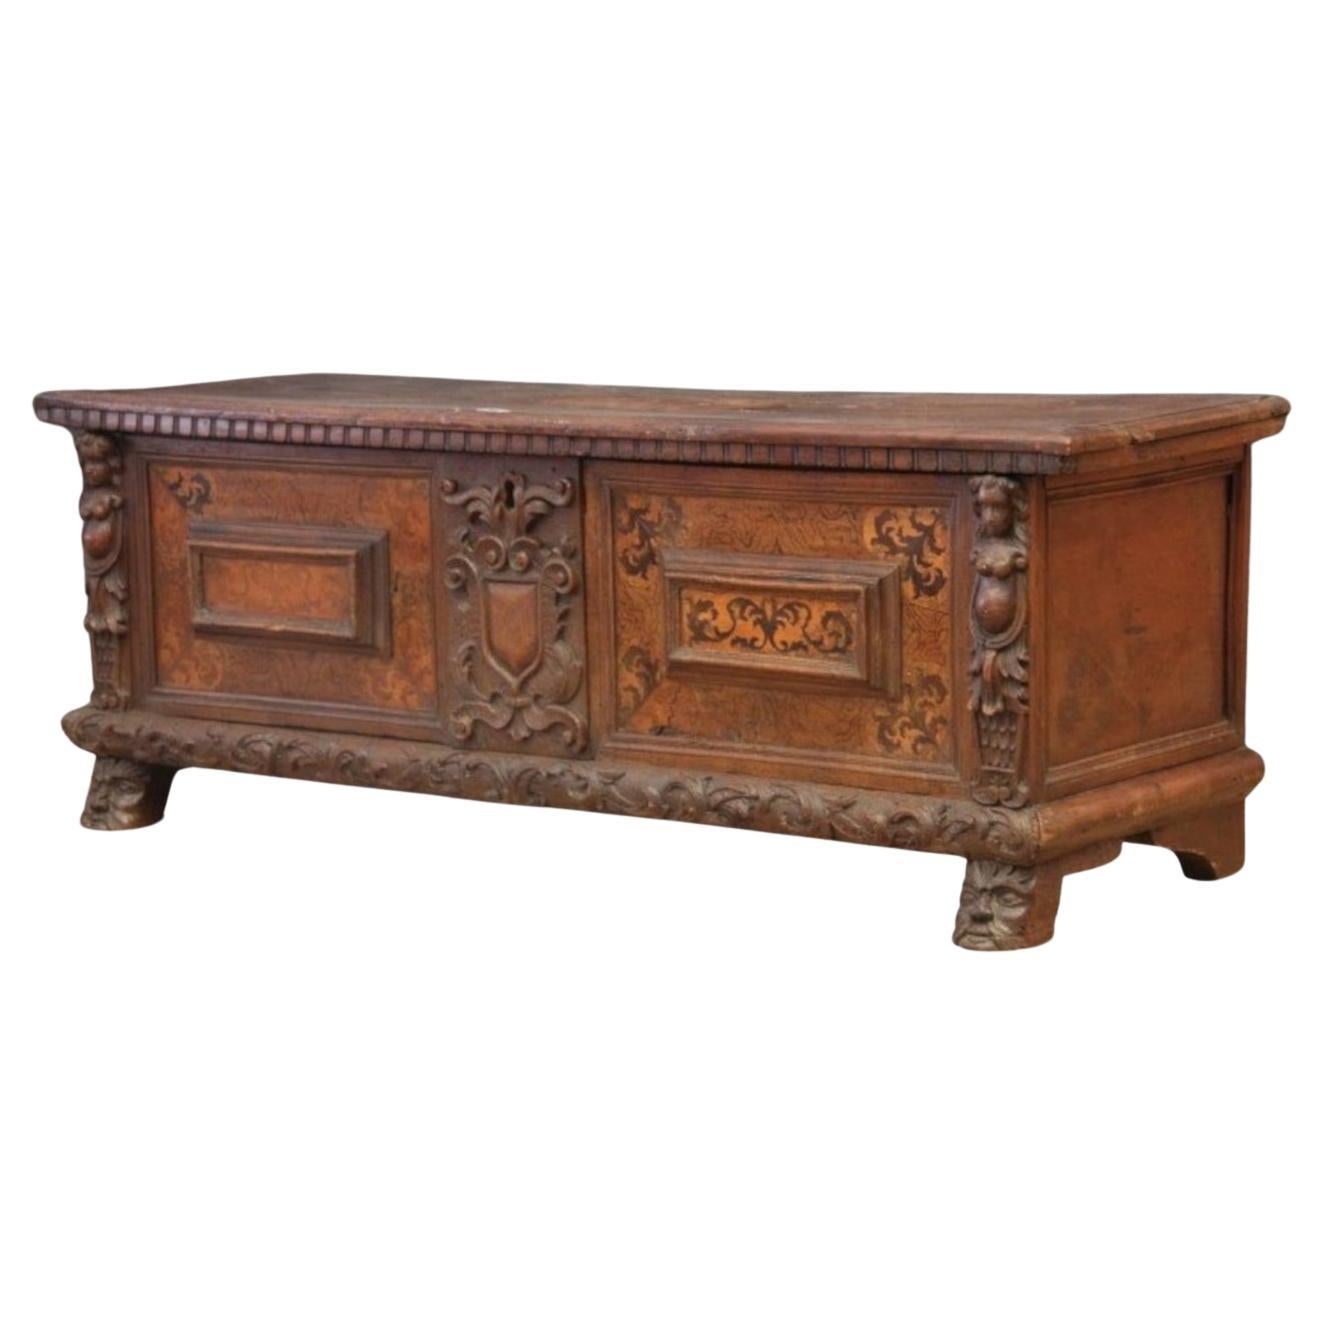 Walnut chest with maple inlays and carved friezes, from the 1600s. For Sale